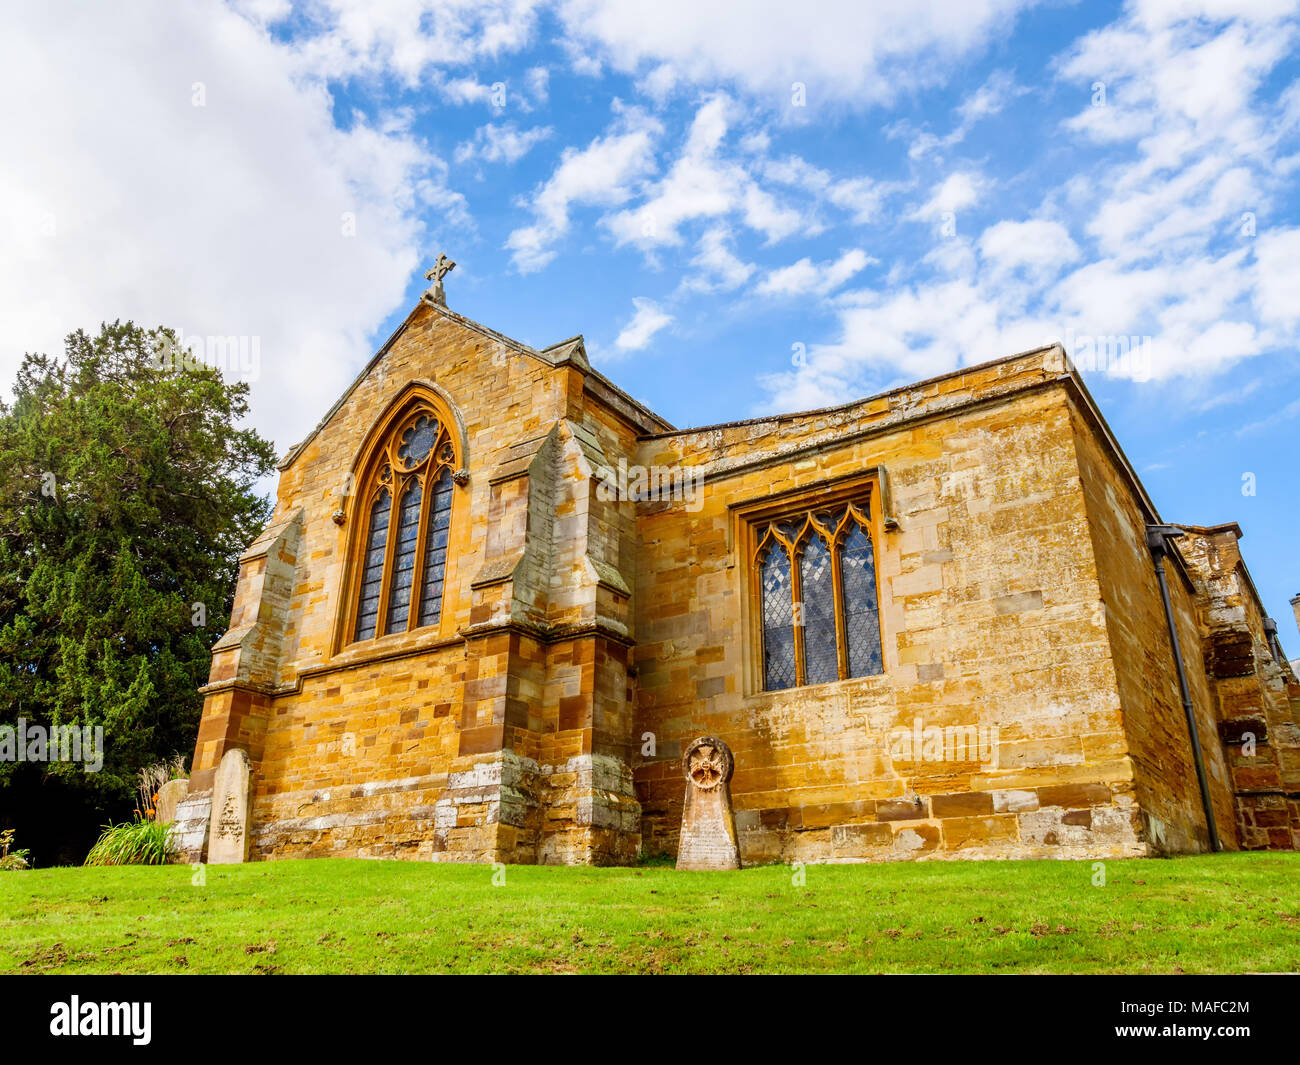 Day view typical Old English Church building over blue sky. Stock Photo